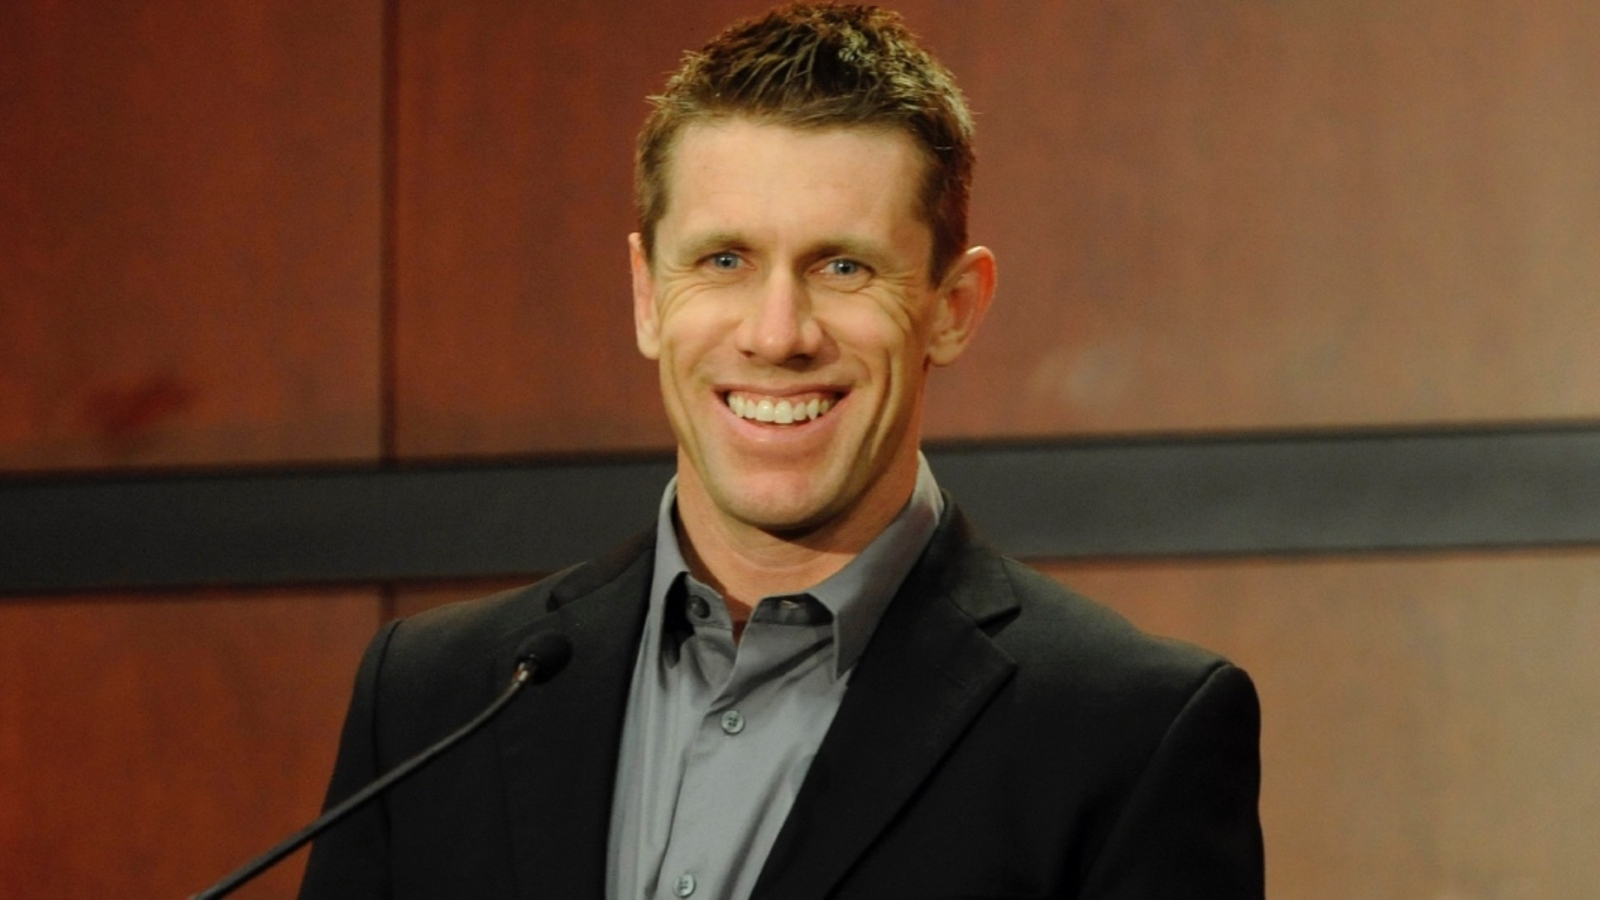 Carl Edwards thought his chances were ‘basically zero’ to make NASCAR Hall of Fame